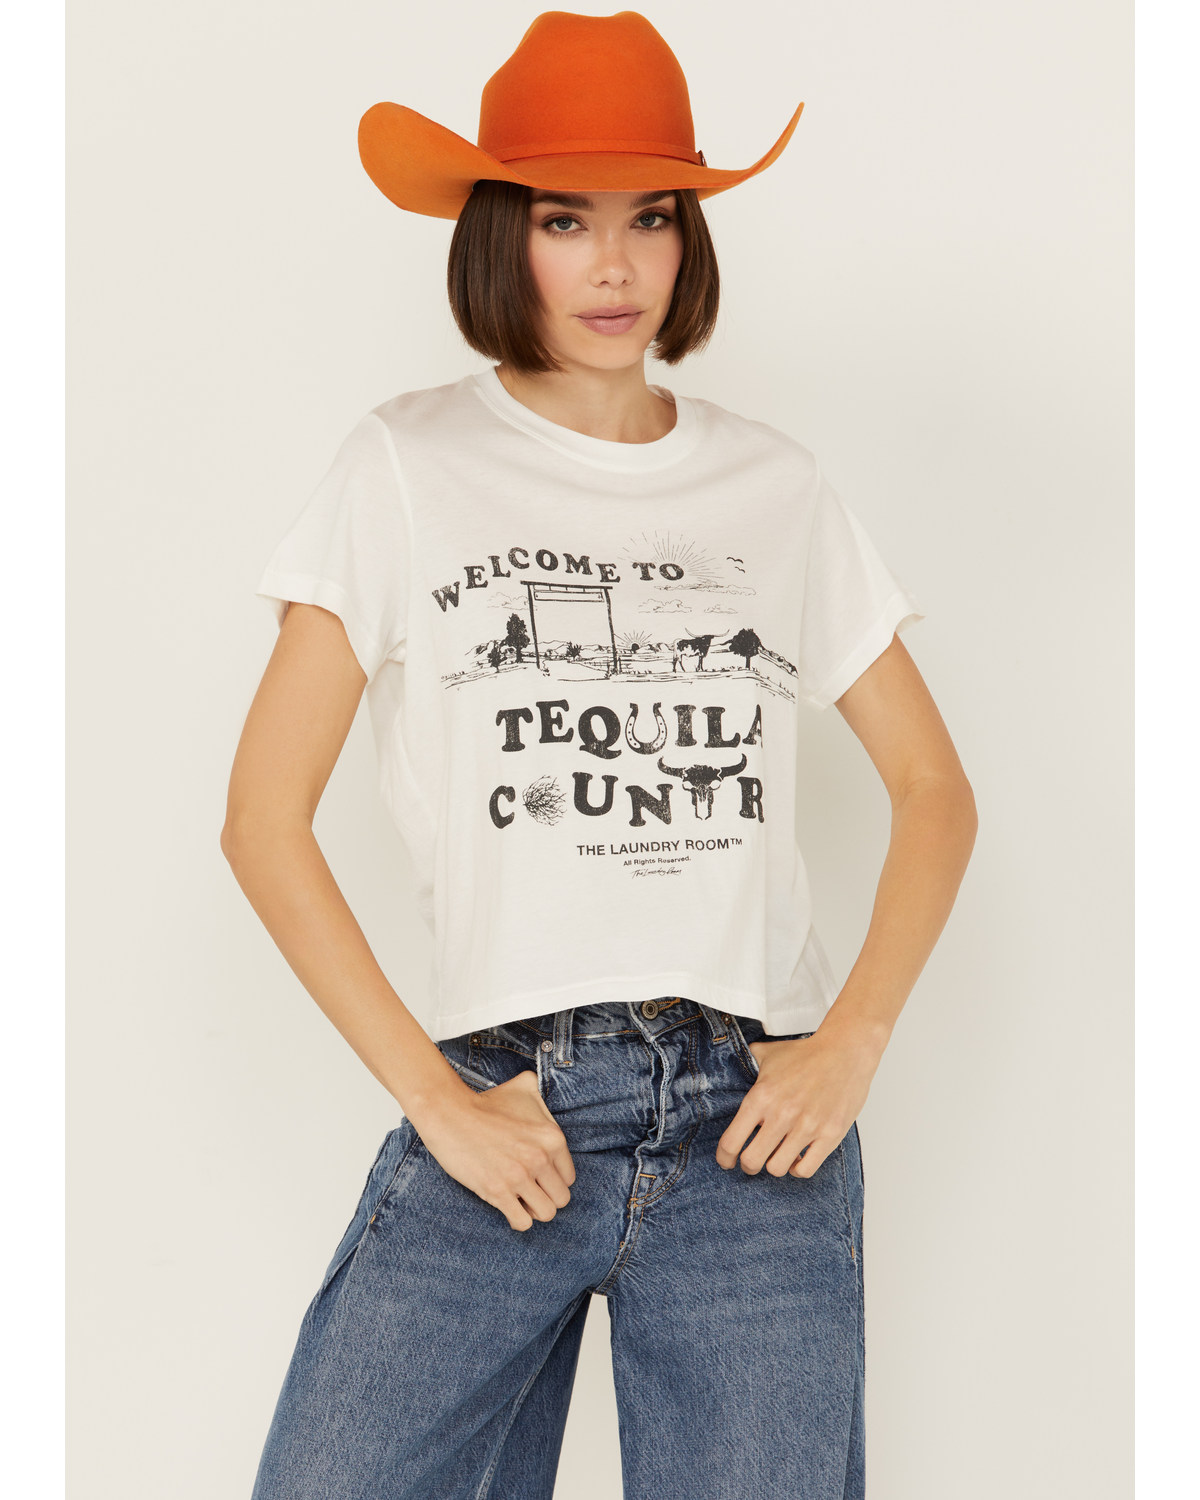 The Laundry Room Women's Tequila Country Short Sleeve Graphic T-Shirt